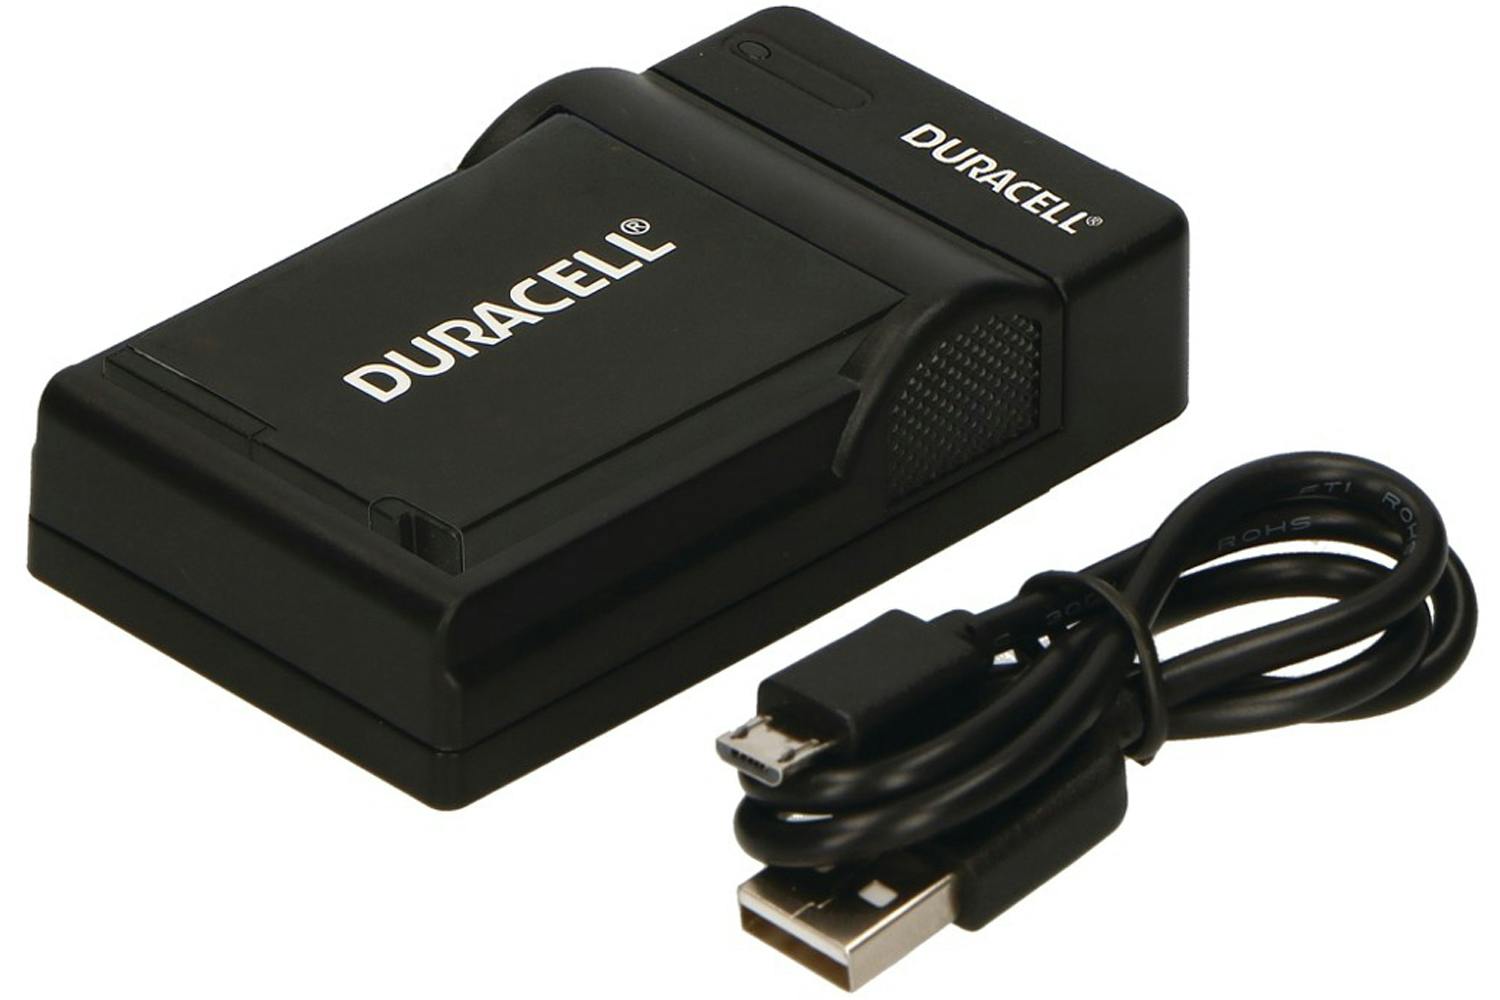 Duracell Duracell Digital Camera Battery Charger